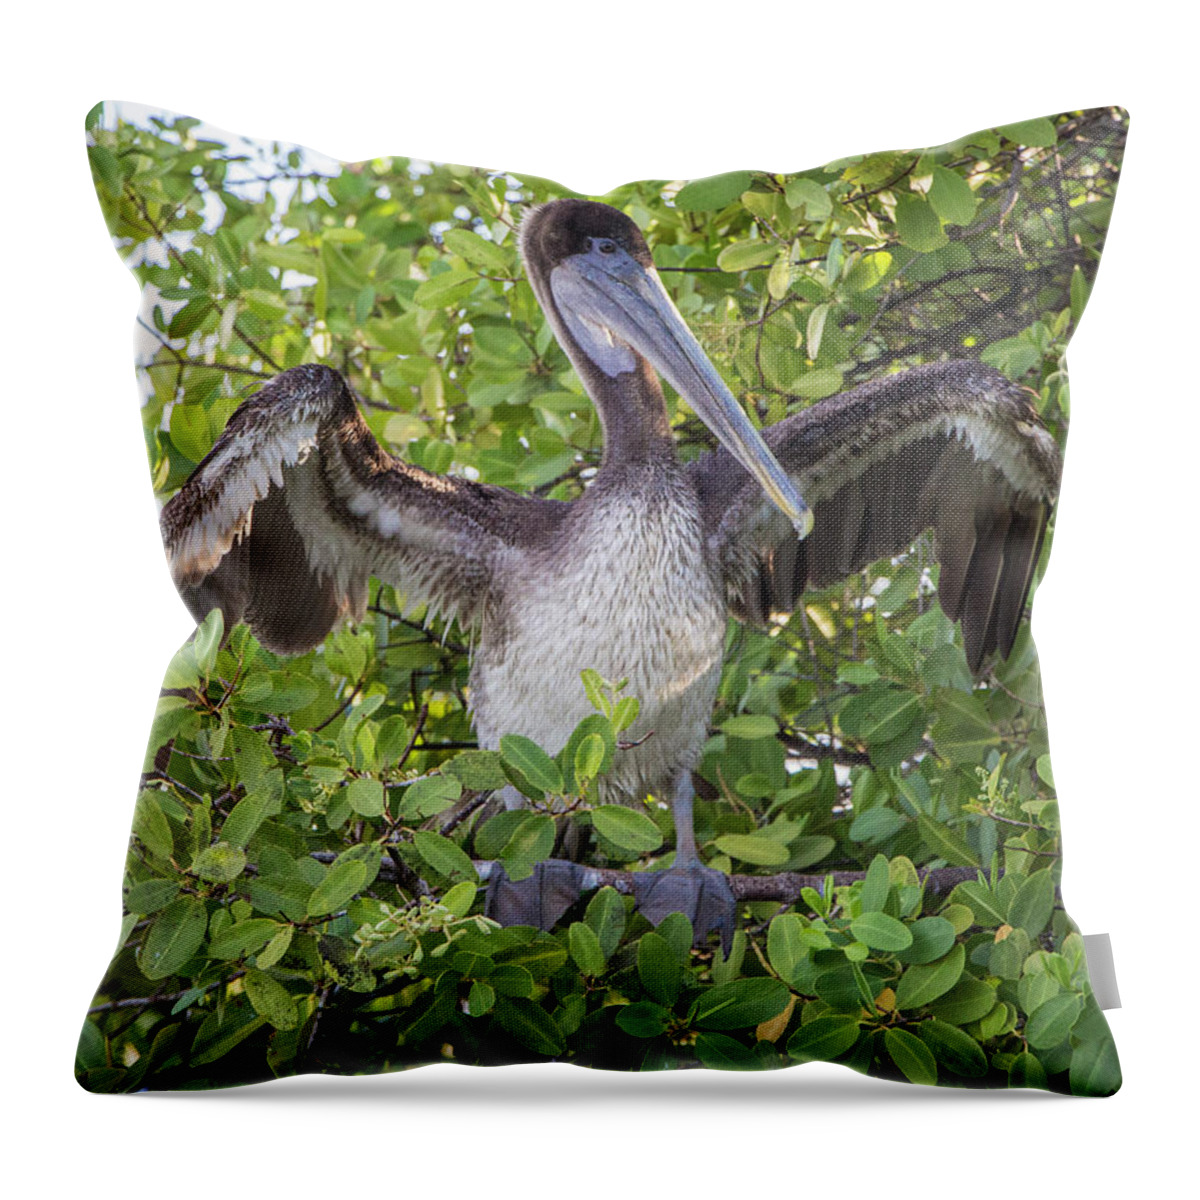 Birds Throw Pillow featuring the photograph Brown Pelican, Santa Cruz, Galapagos by Venetia Featherstone-Witty